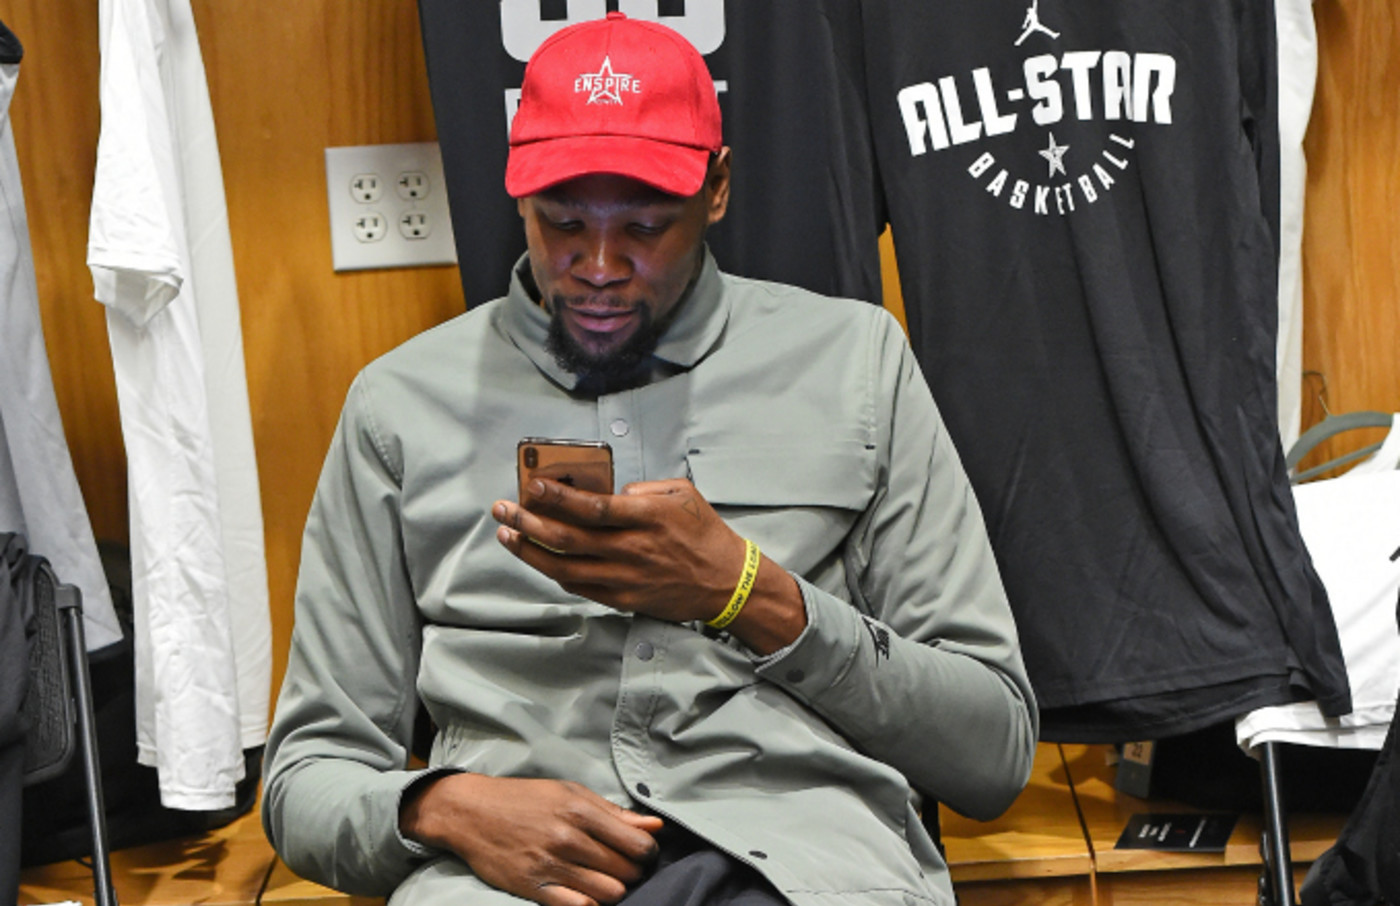 kevin durant on phone